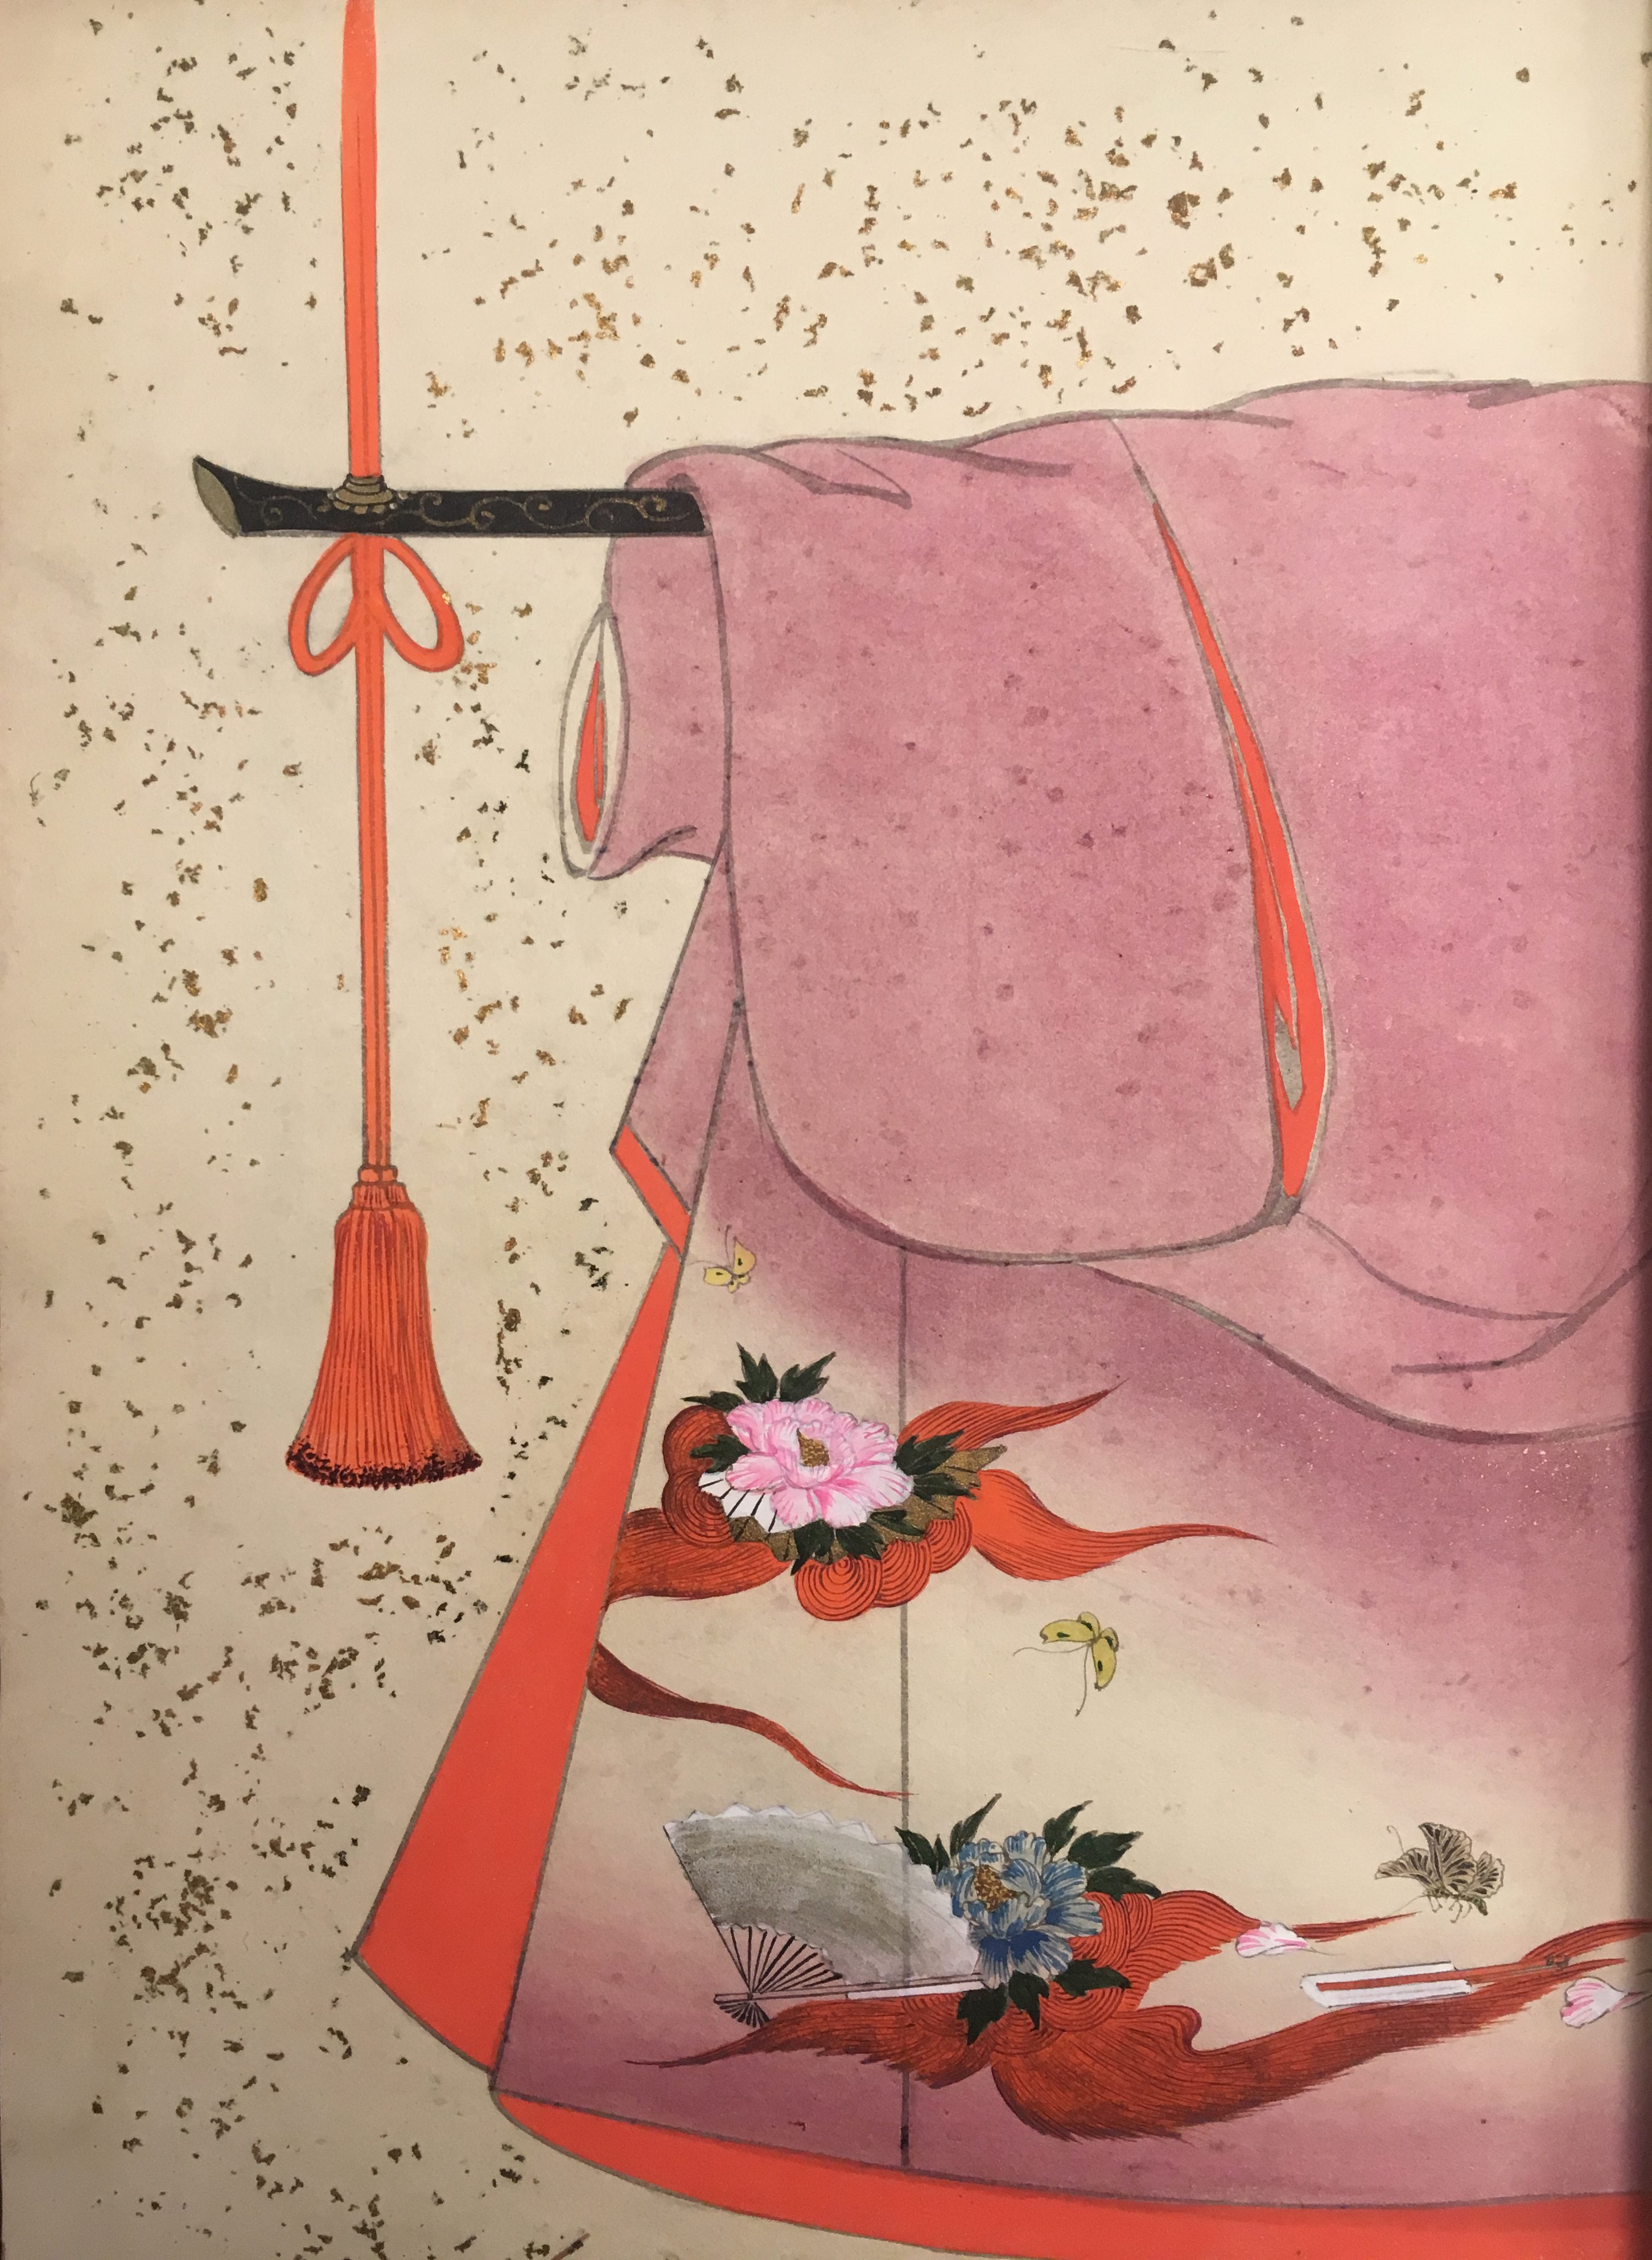 A pink kimono with reddish-pink interior. The pattern in the lower outside corner depicts butterflies traveling toward two peonies. A white fan lays next to one of the peonies.